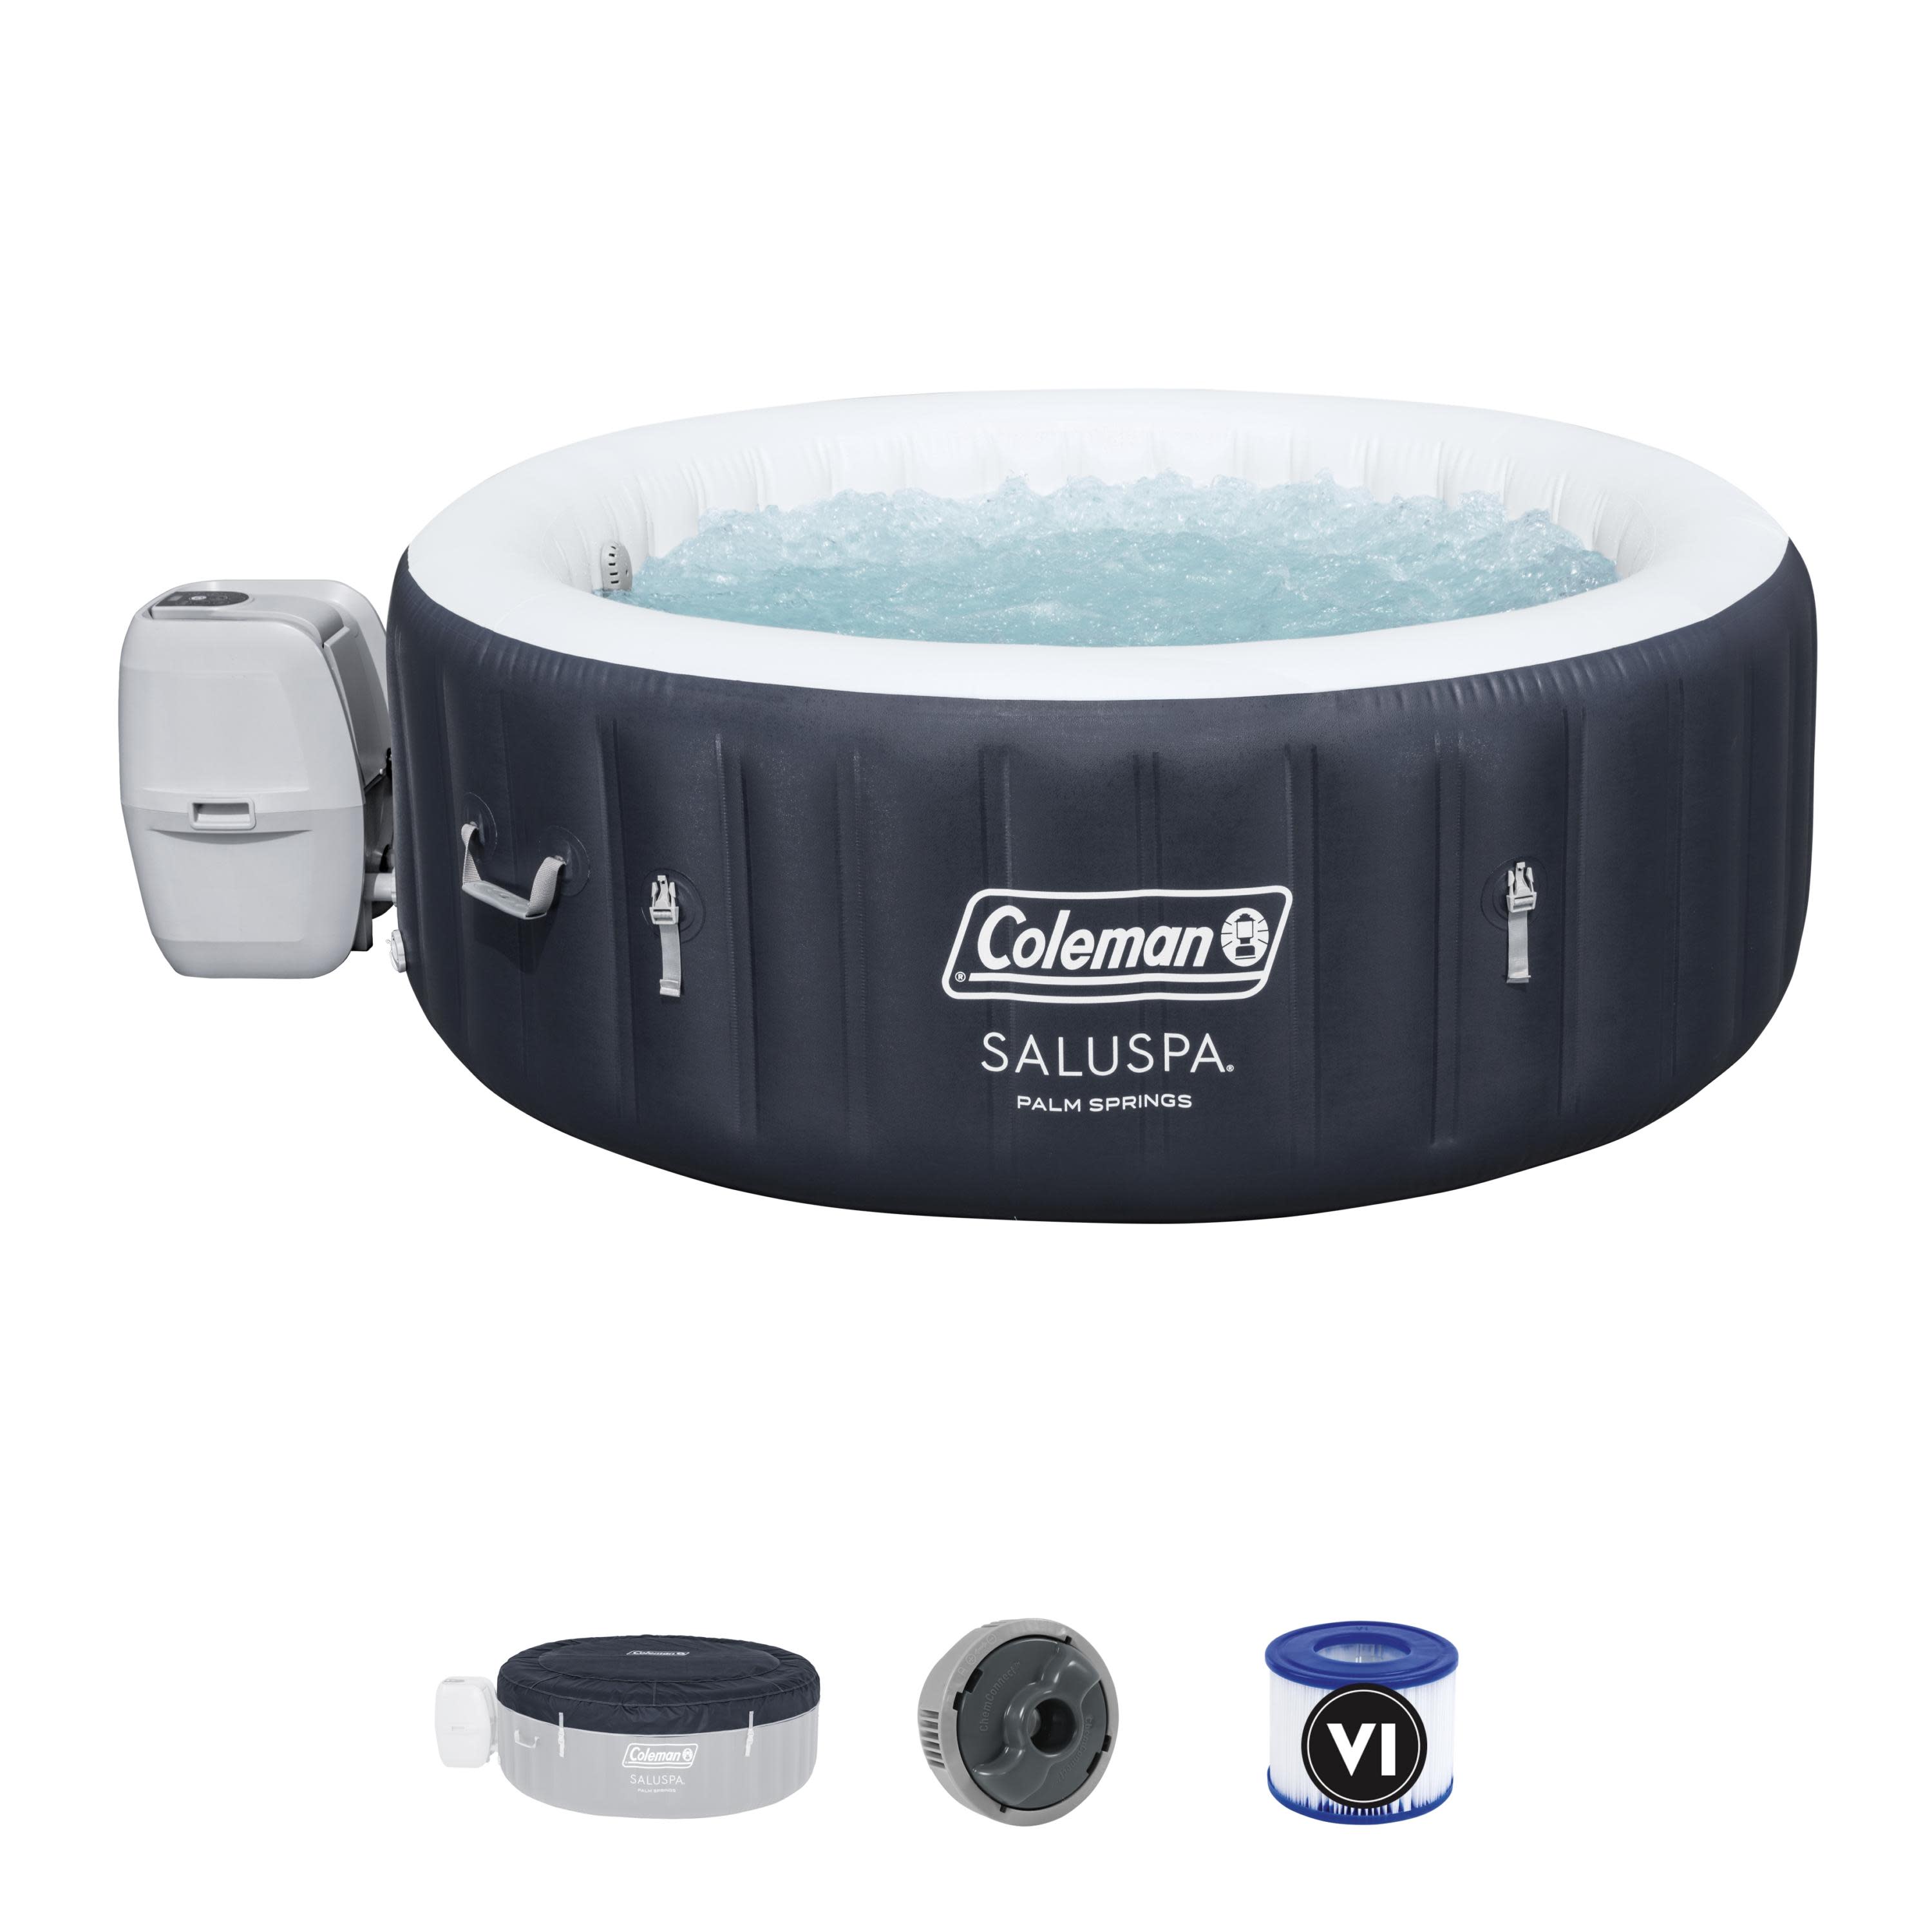 Coleman Palm Springs AirJet Inflatable Hot Tub Spa